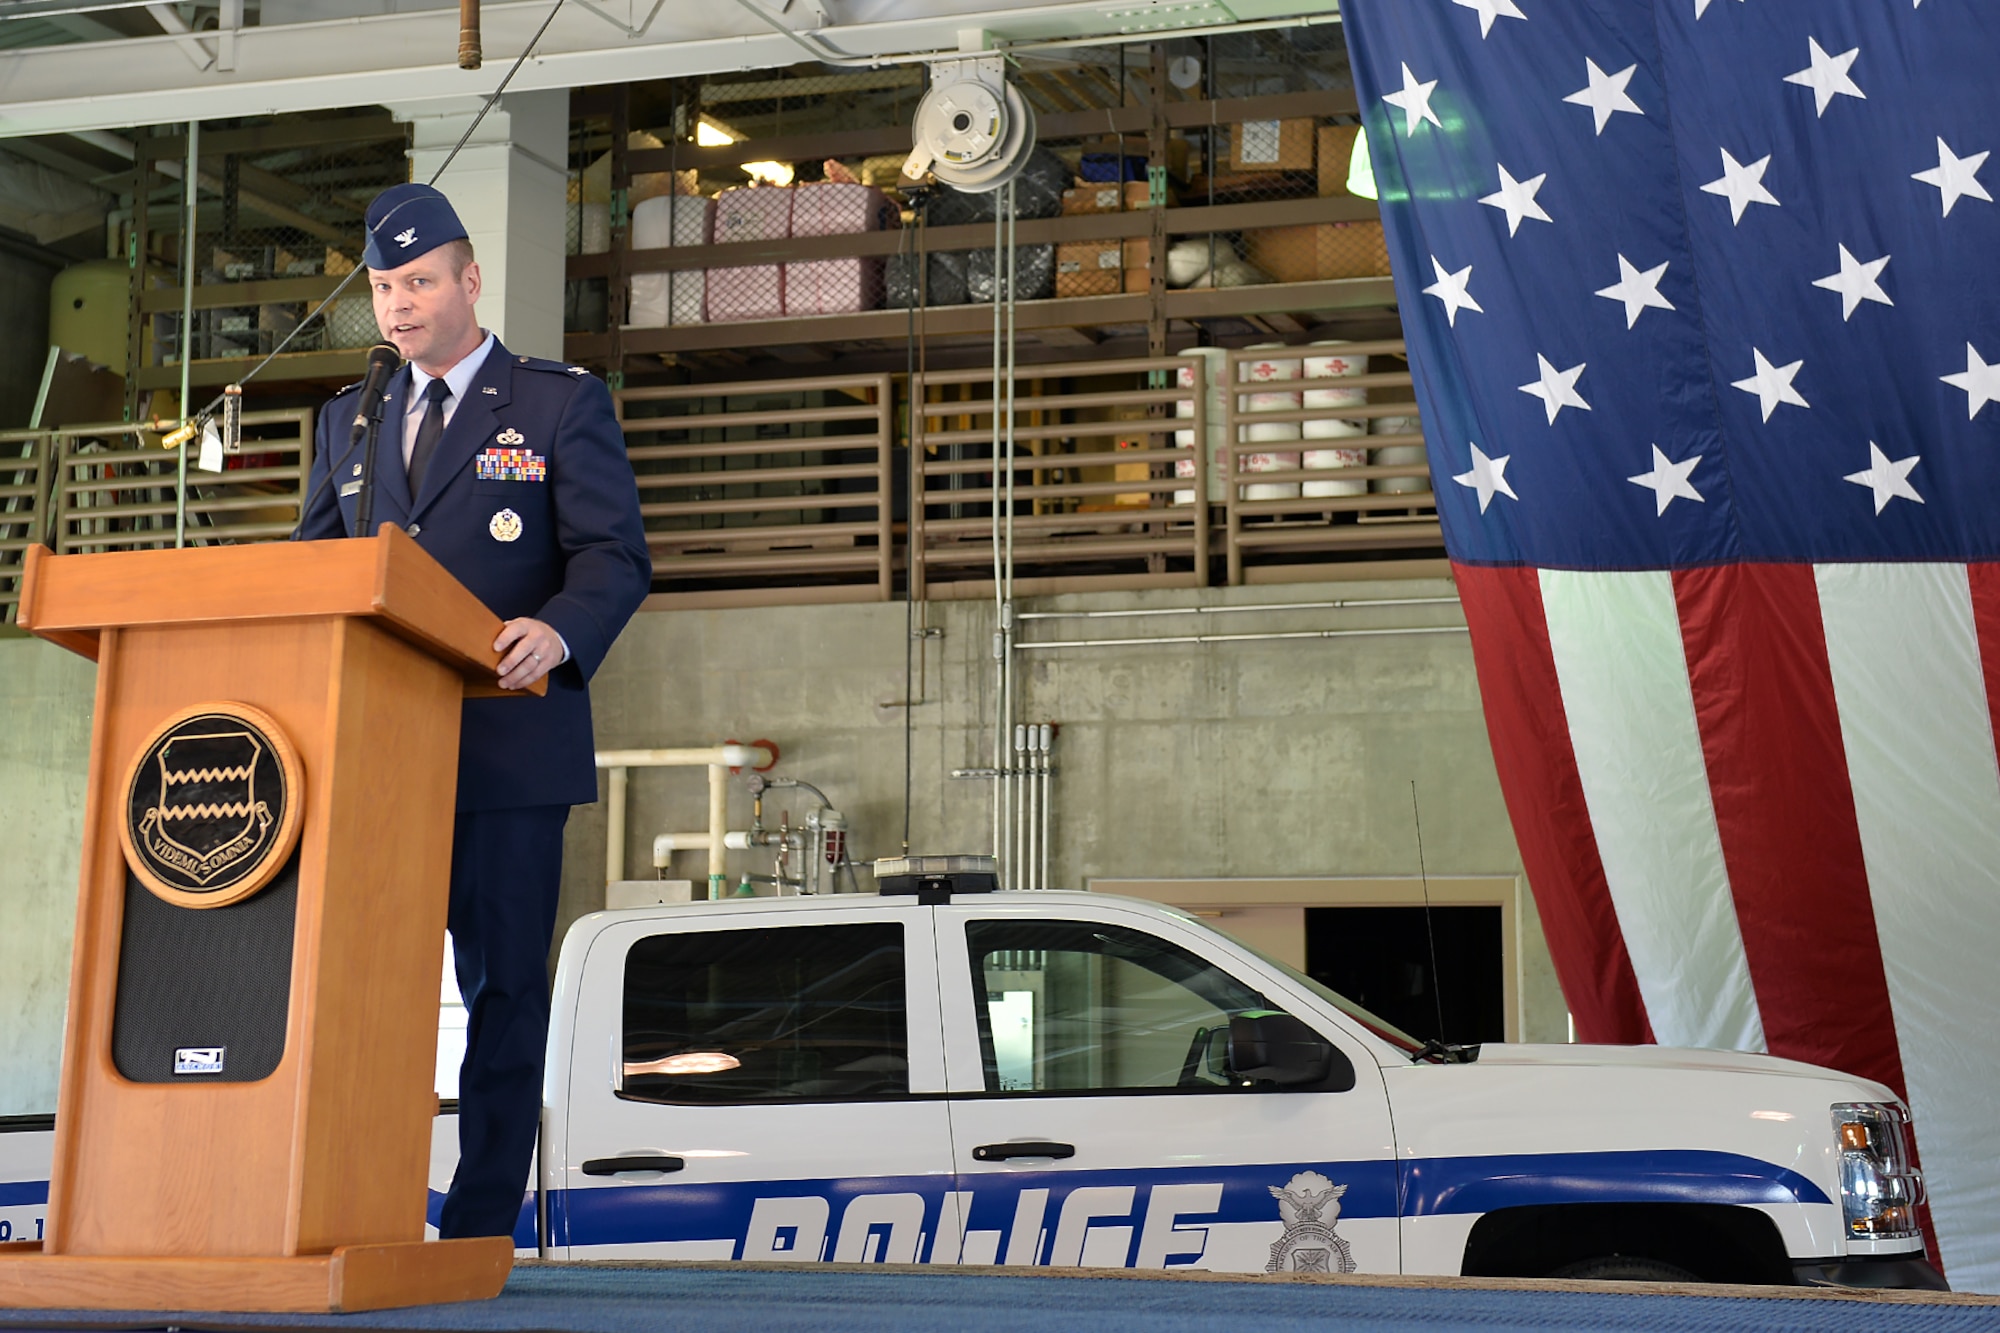 Col. David Norton speaks to the attendees of the 55th Mission Support Group change of command ceremony at Offutt Air Force Base, Nebraska, July 14, 2017. Norton accepted command of the 55th MSG, which is responsible for five squadrons encompassing 1,600 individuals who support Air Combat Command’s largest wing and over 50 tenant units.